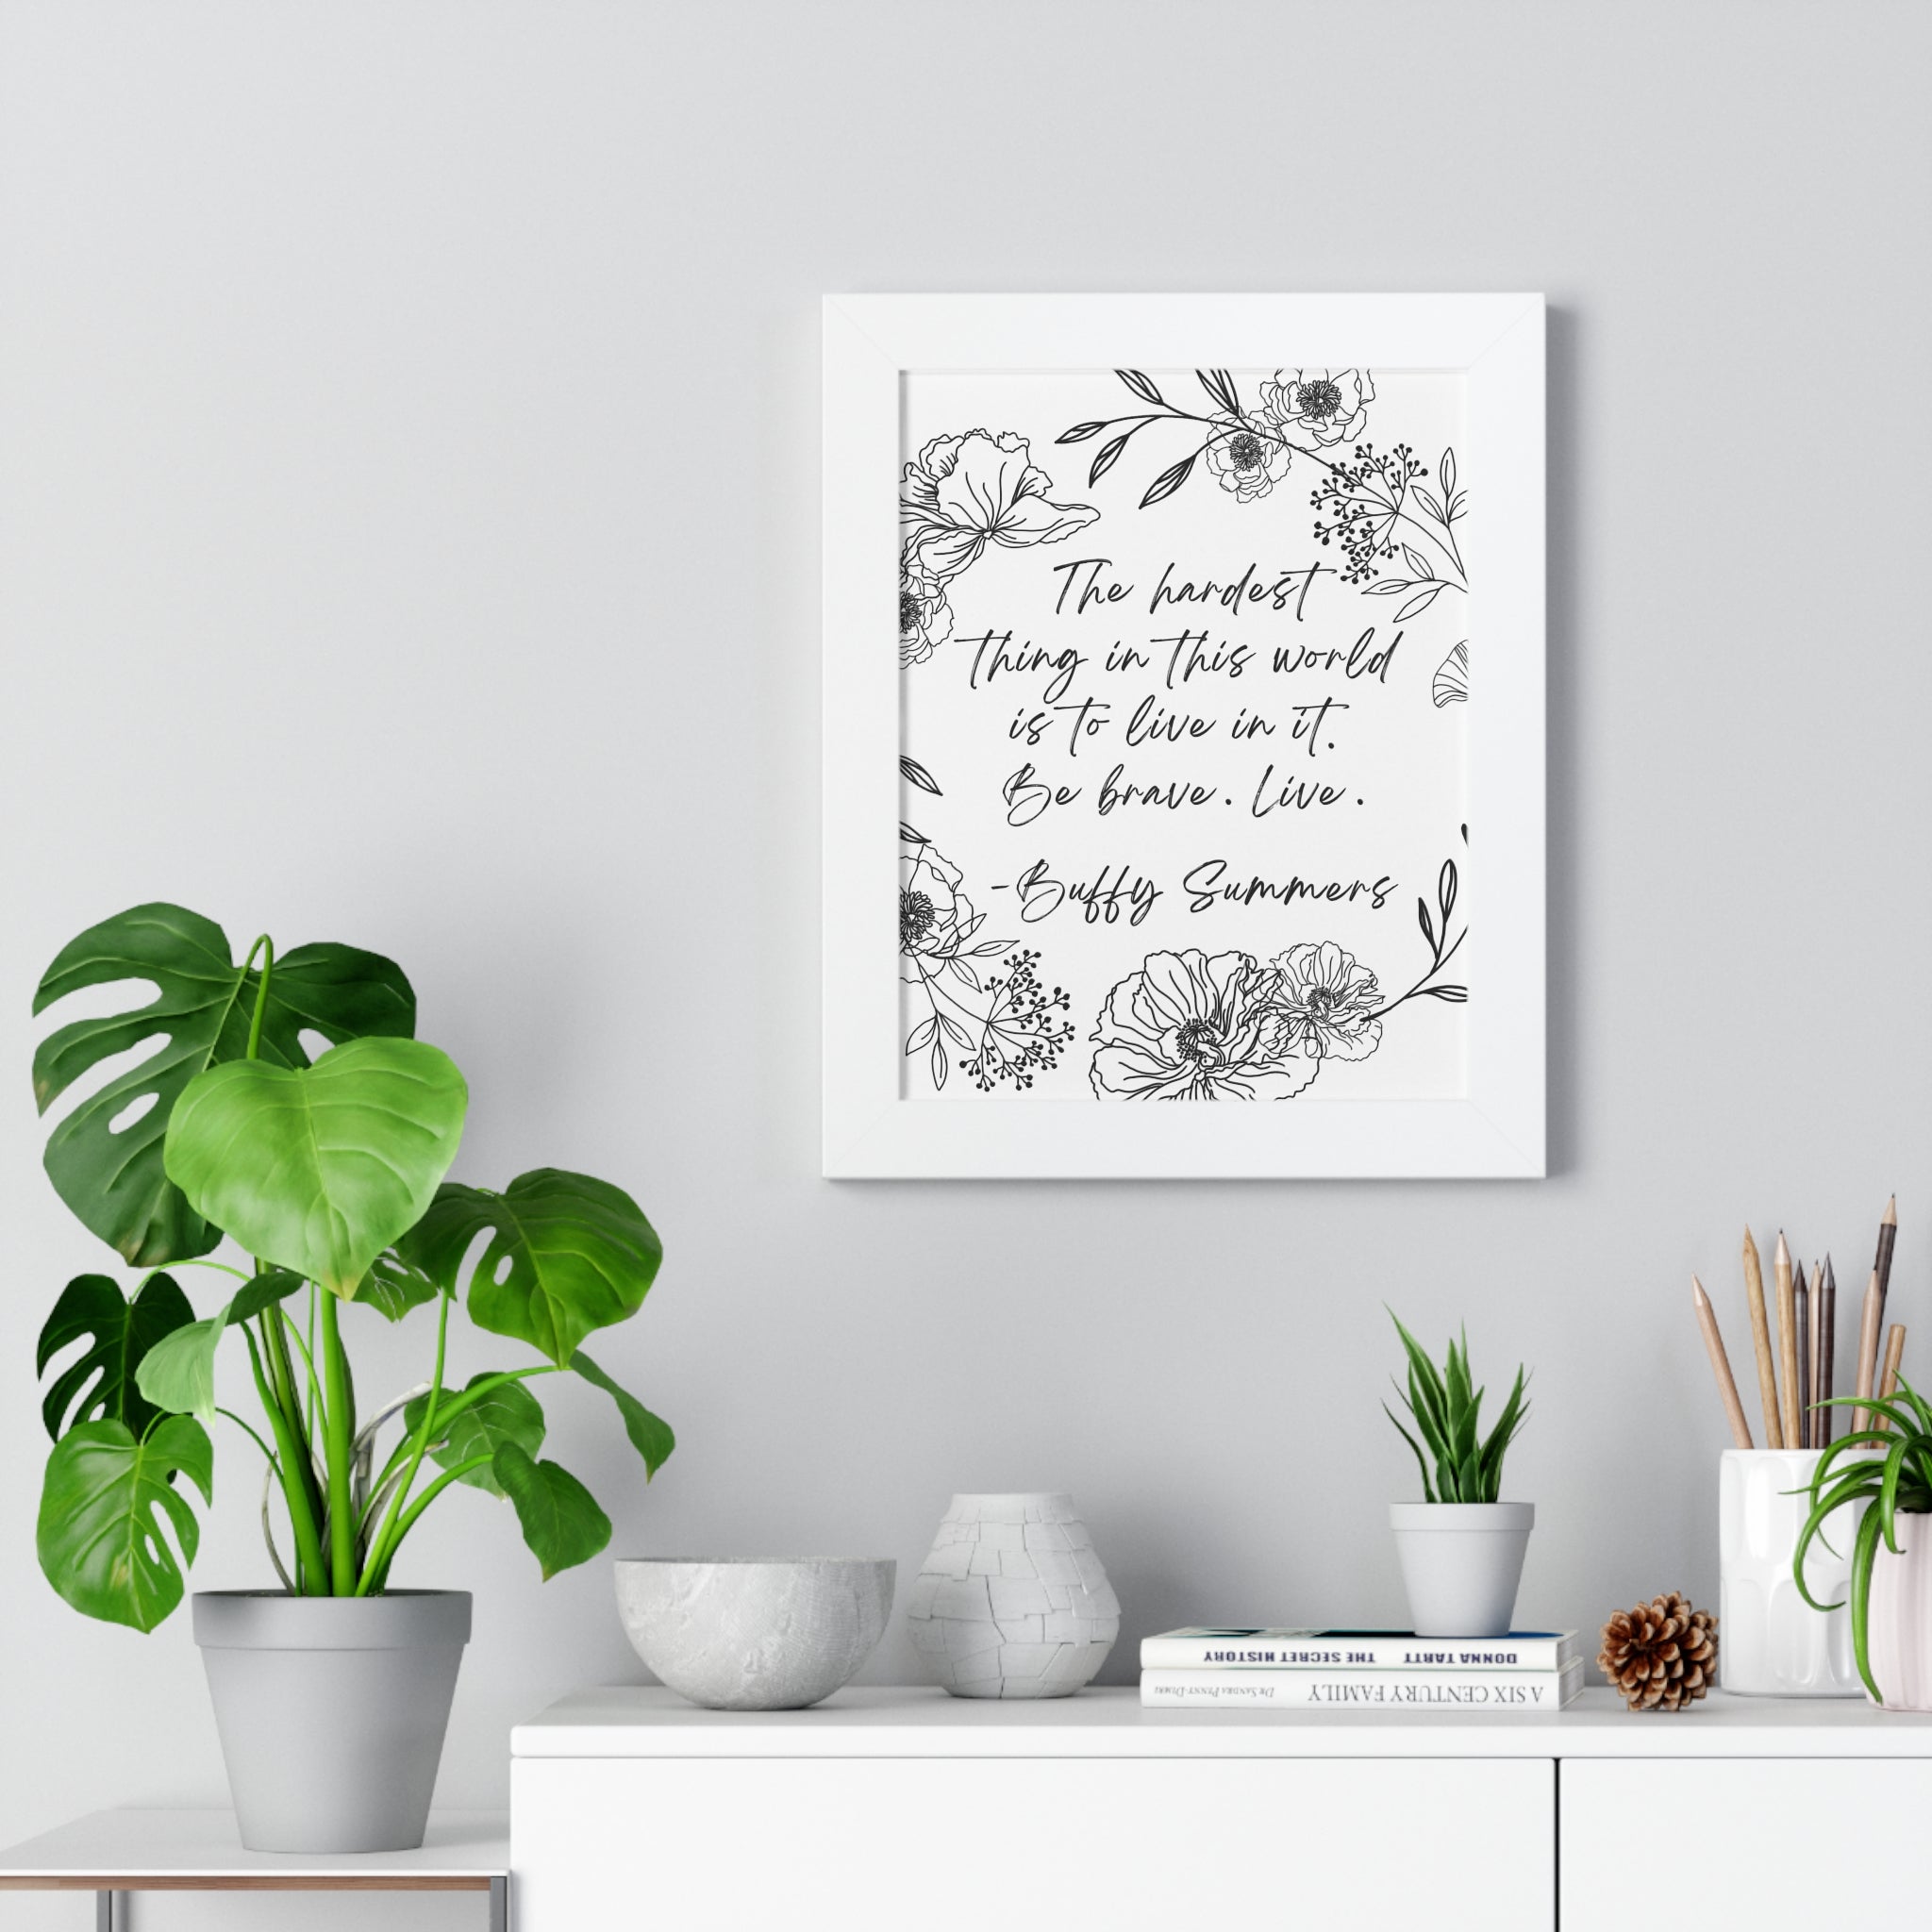 BTVS Buffy Summers Quote Framed Vertical Poster